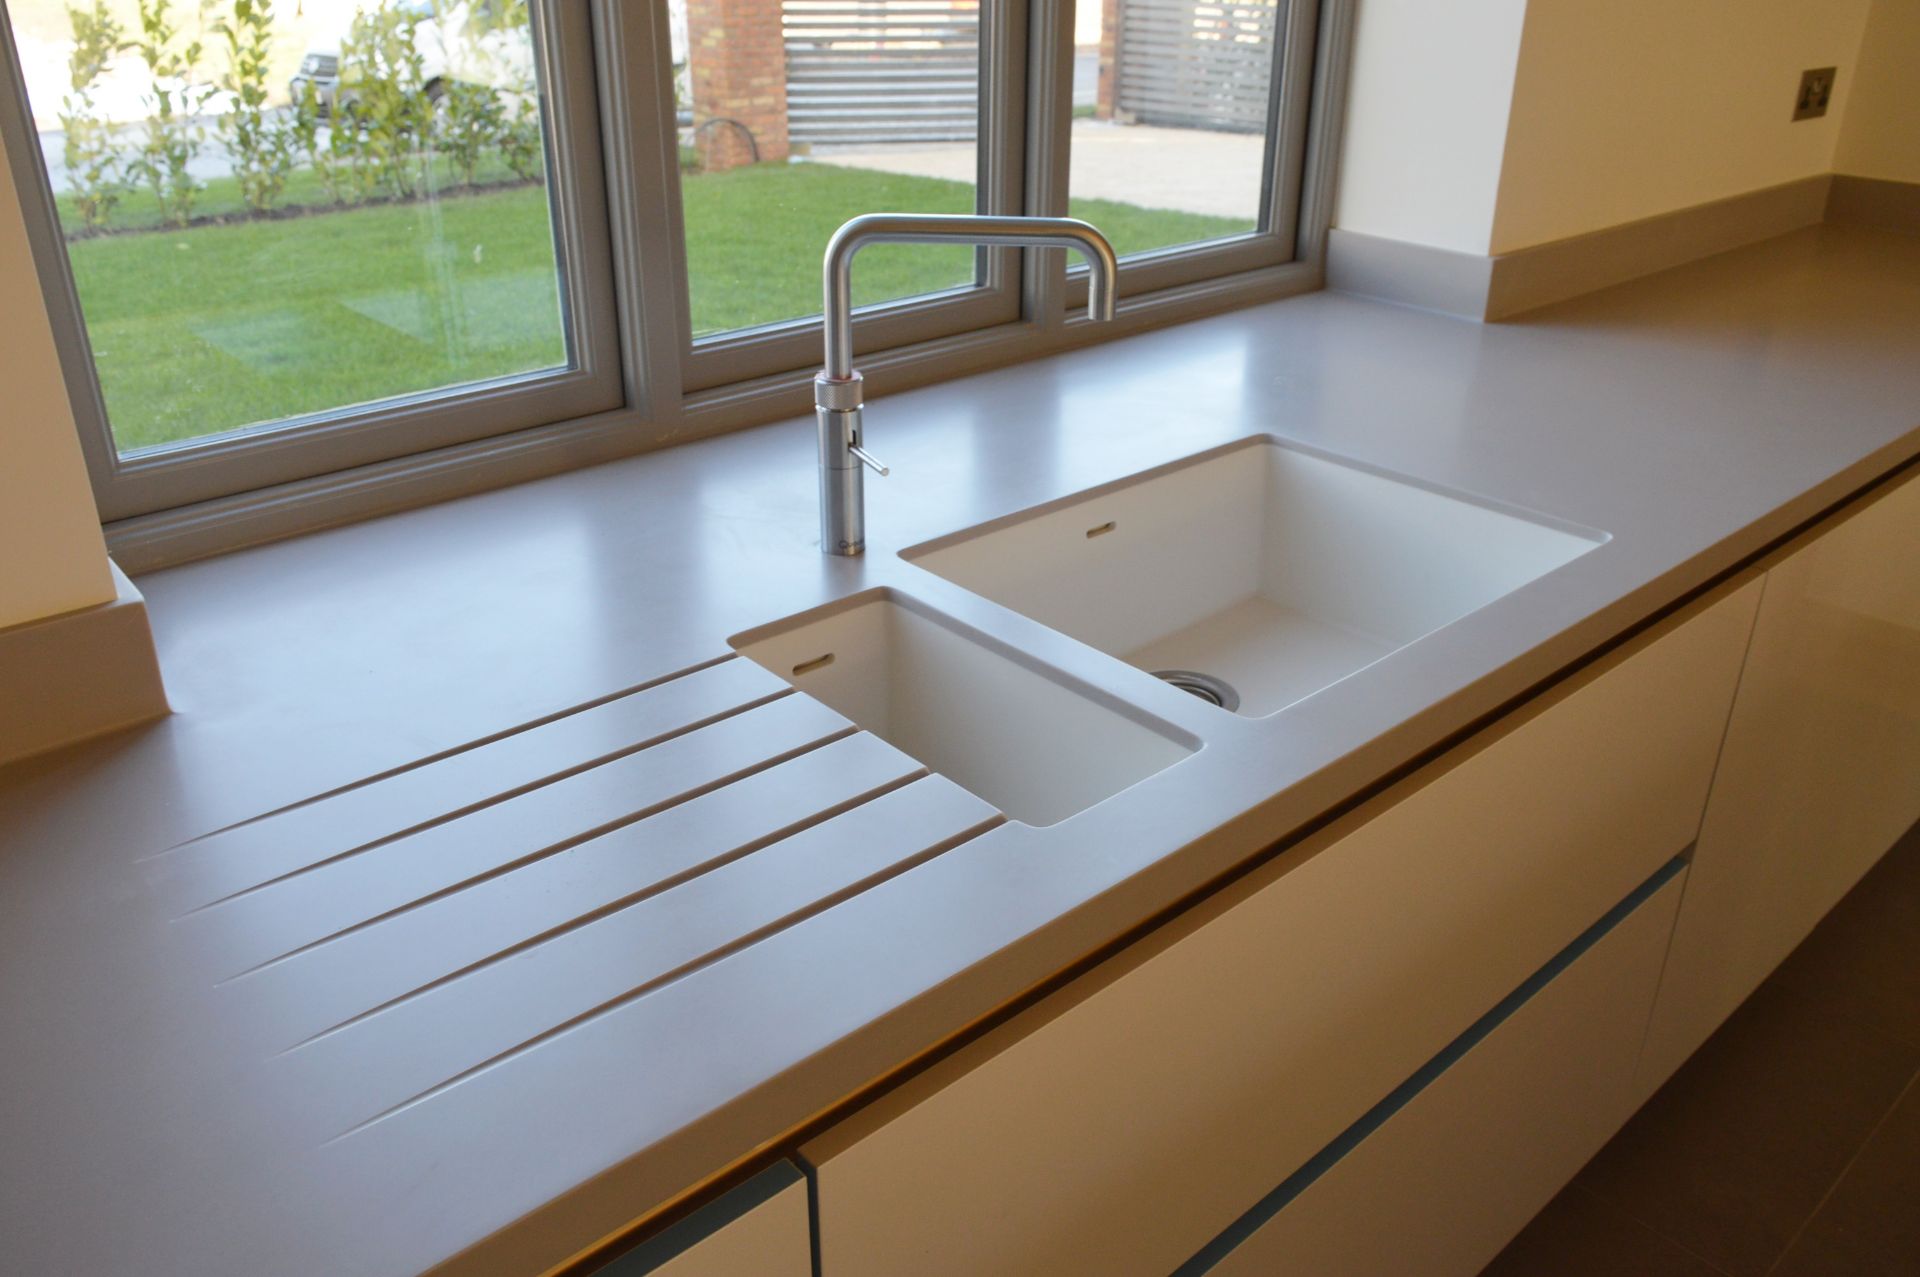 1 x Stunning KELLER Handleless FITTED KITCHEN With Corian Clay Worktops, Centre Island With - Image 100 of 104